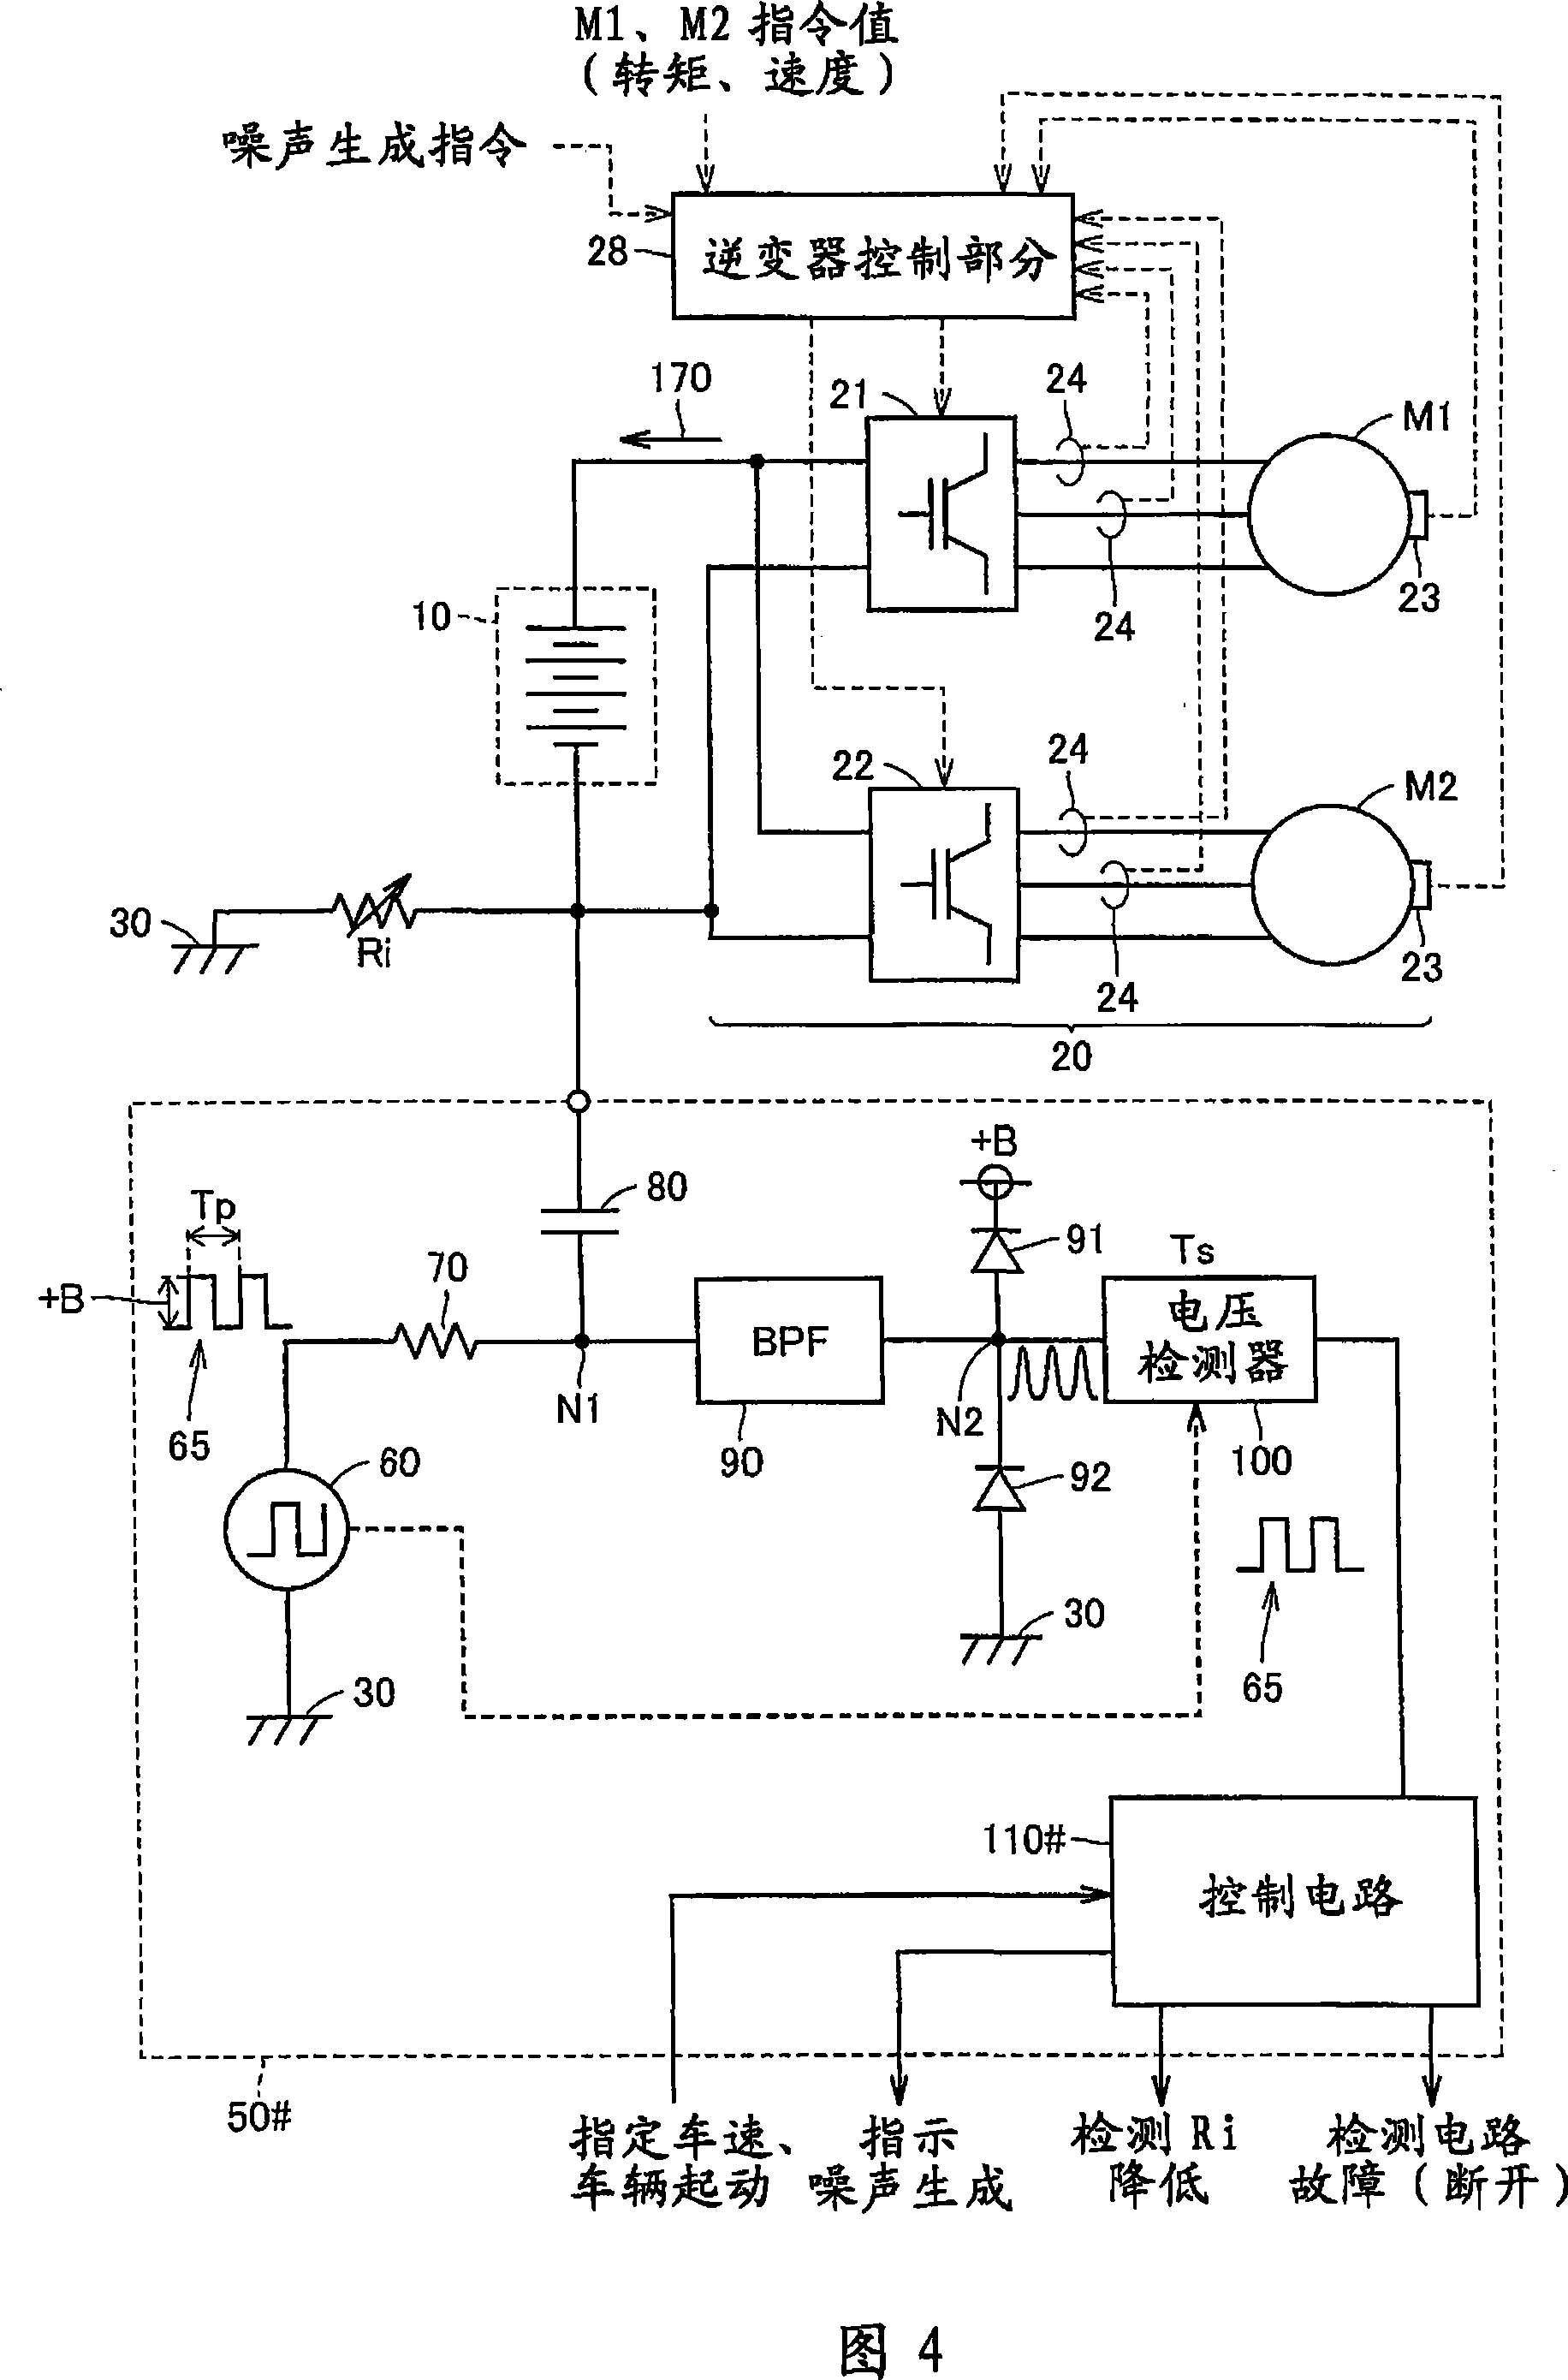 Insulation resistance degradation detector and failure self-diagnostic method for insulation resistance degradation detector